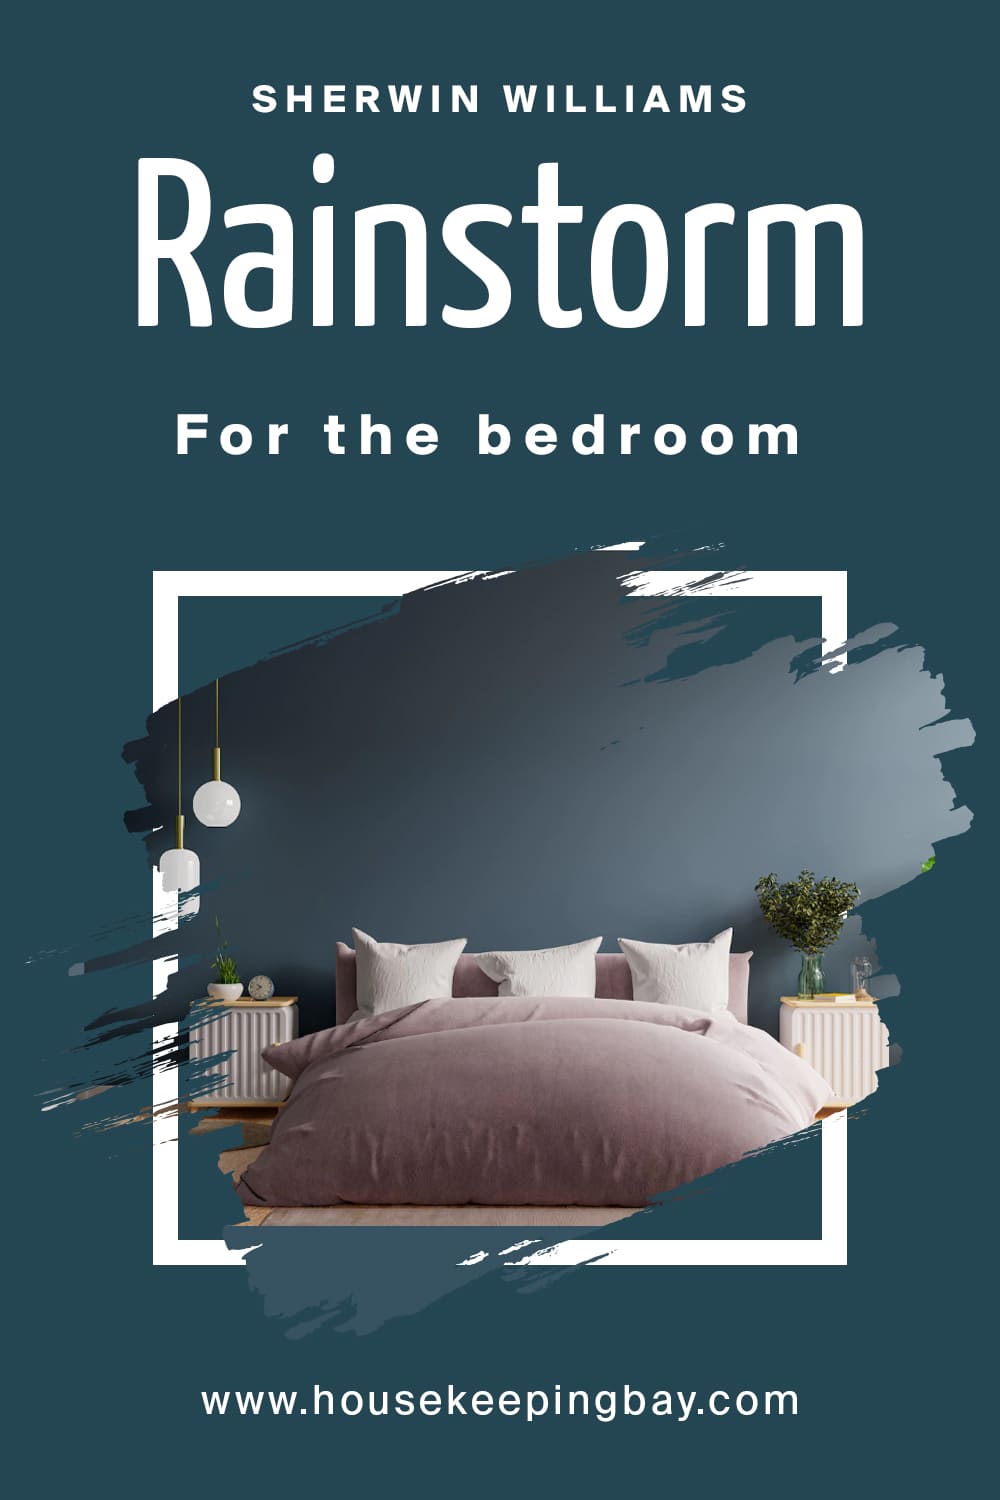 Sherwin Williams. Rainstorm For the bedroom